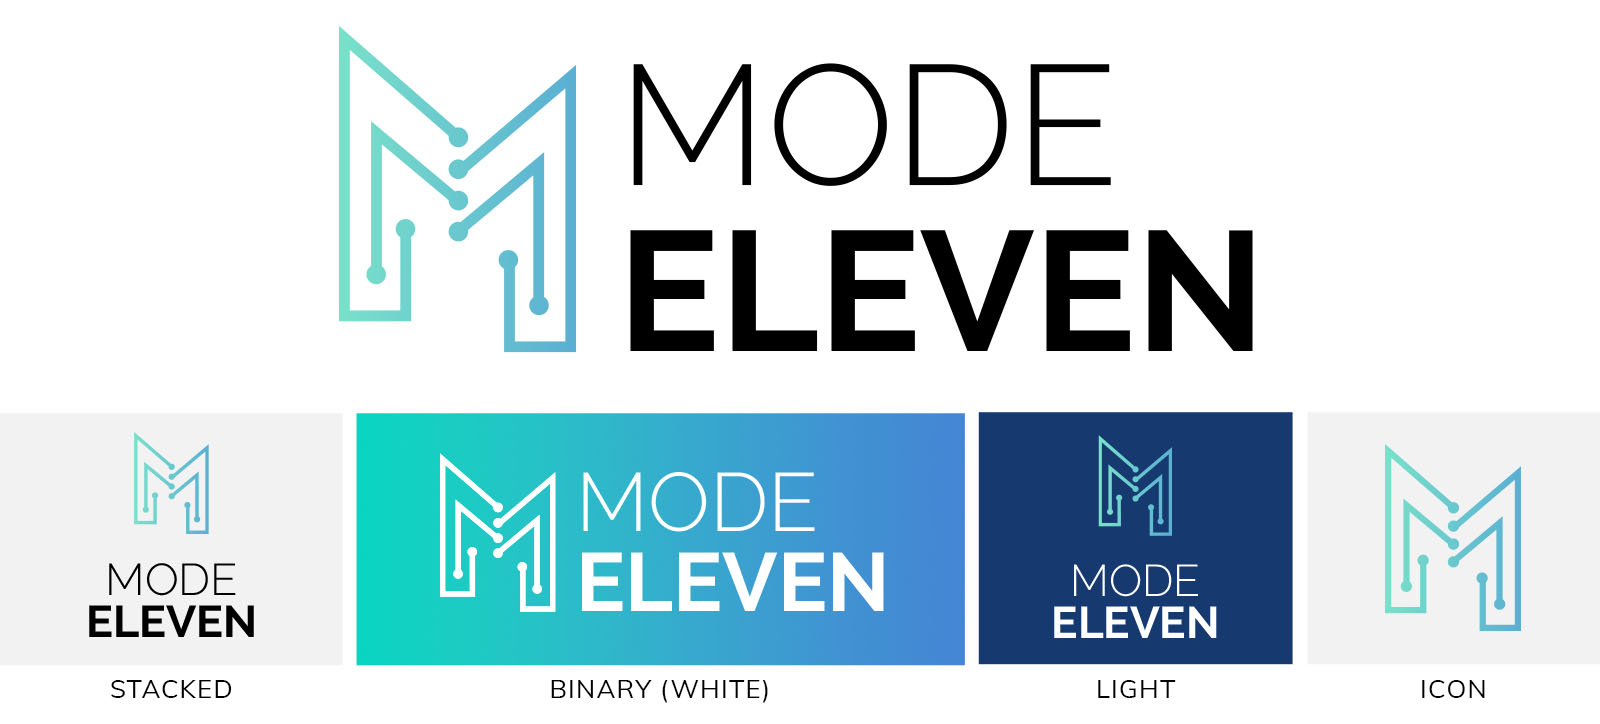 Mode Eleven logo set displaying the primary logo, a stacked alternate layout, a white binary color version, a light-against-dark color version, and the Mode Eleven icon